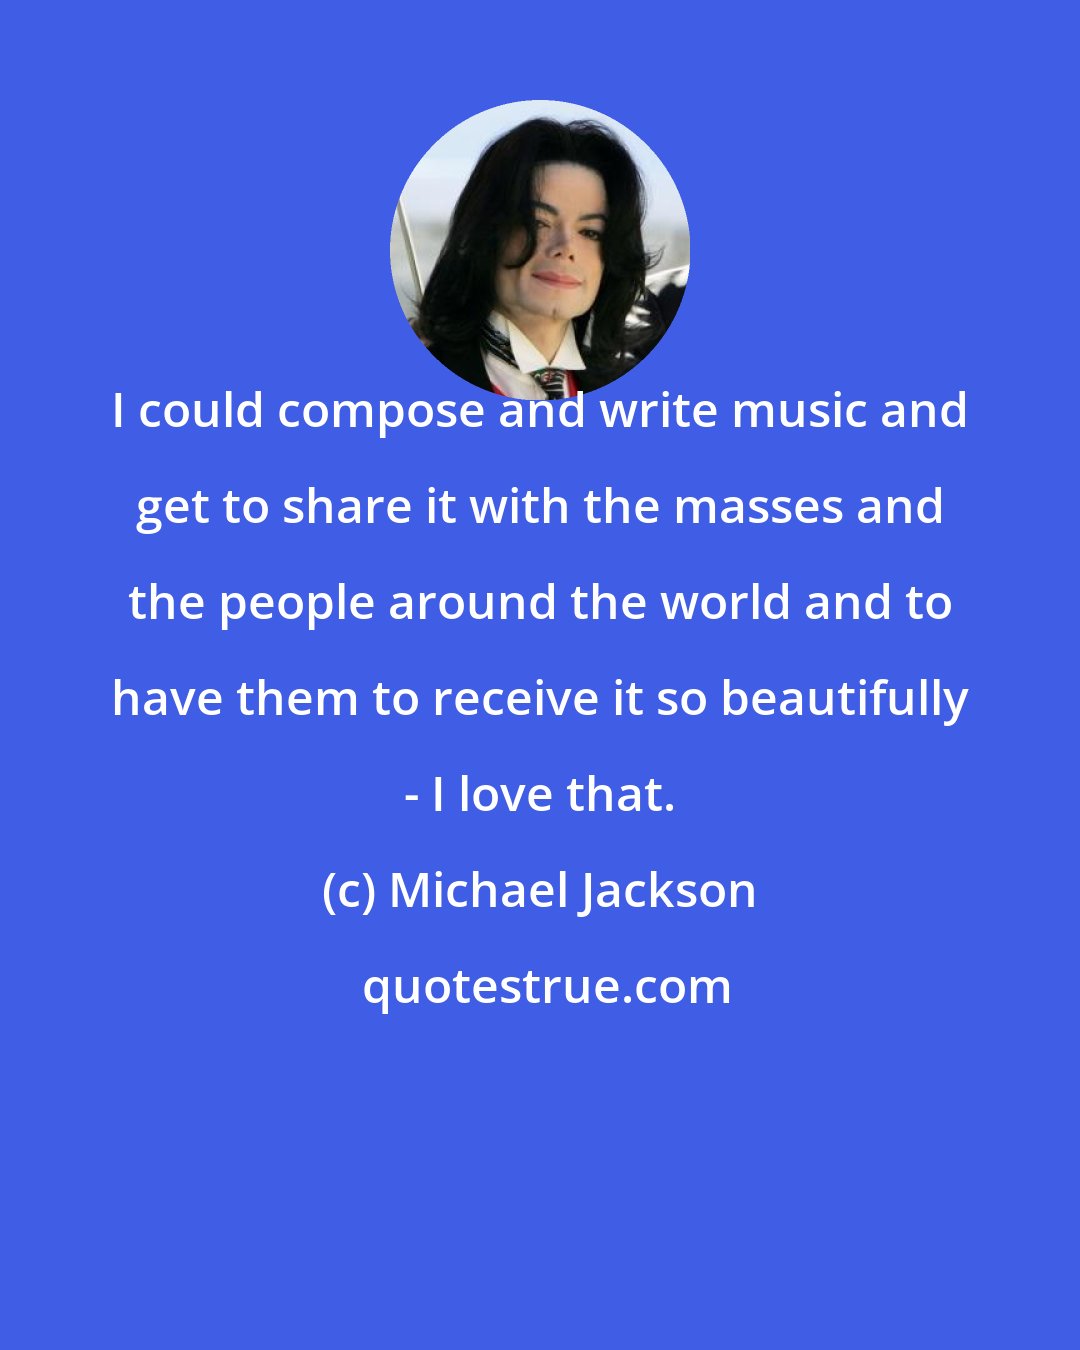 Michael Jackson: I could compose and write music and get to share it with the masses and the people around the world and to have them to receive it so beautifully - I love that.